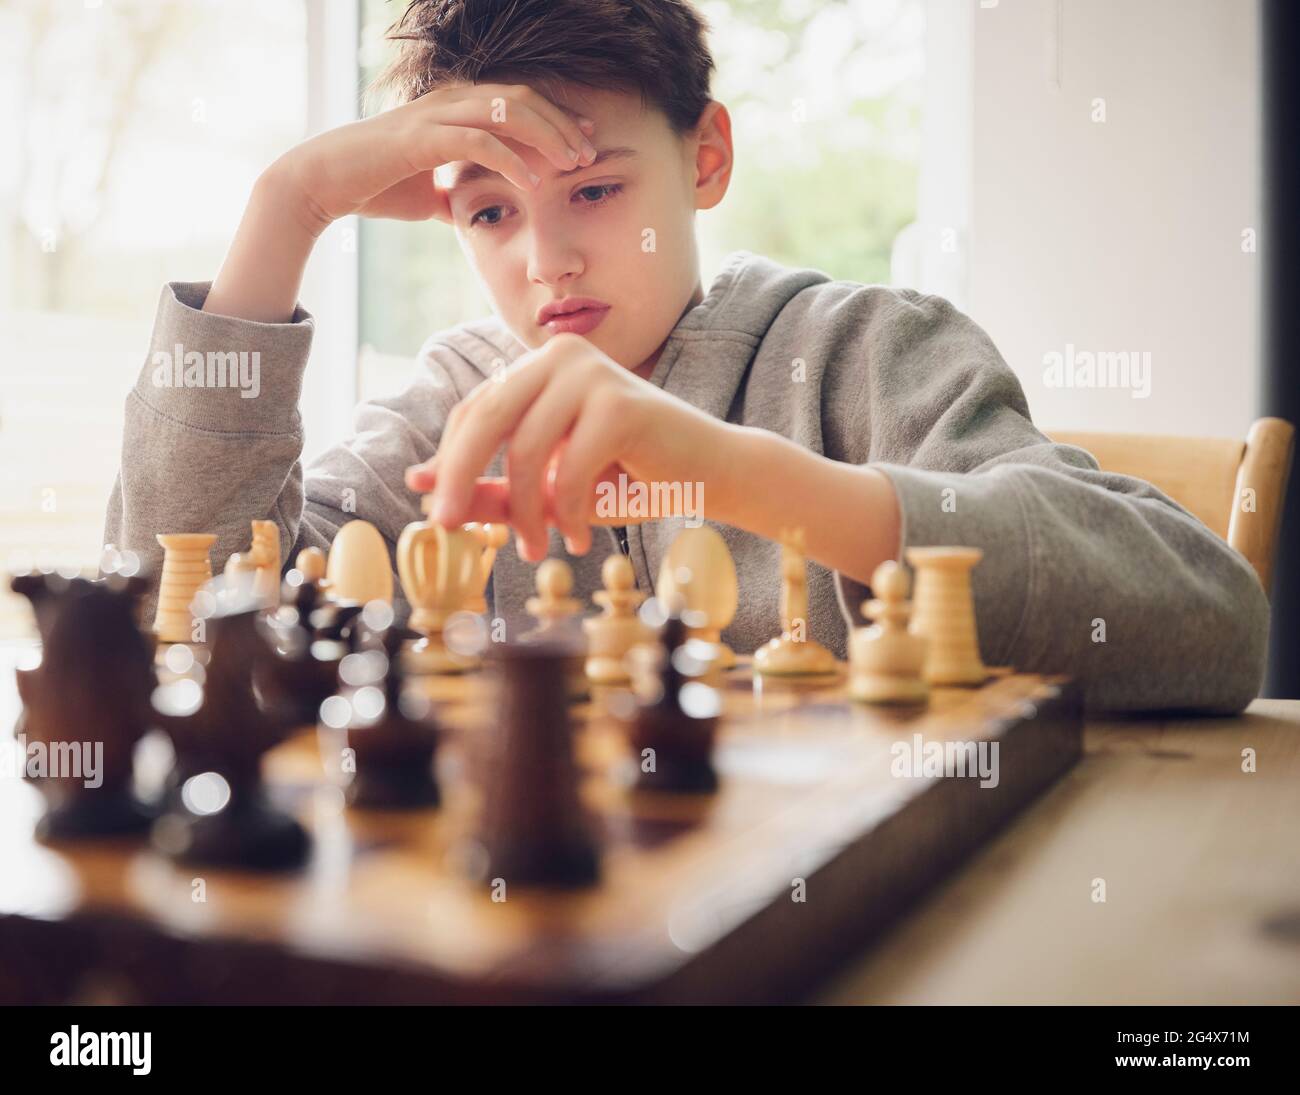 Boy with head in hand playing chess at home Stock Photo